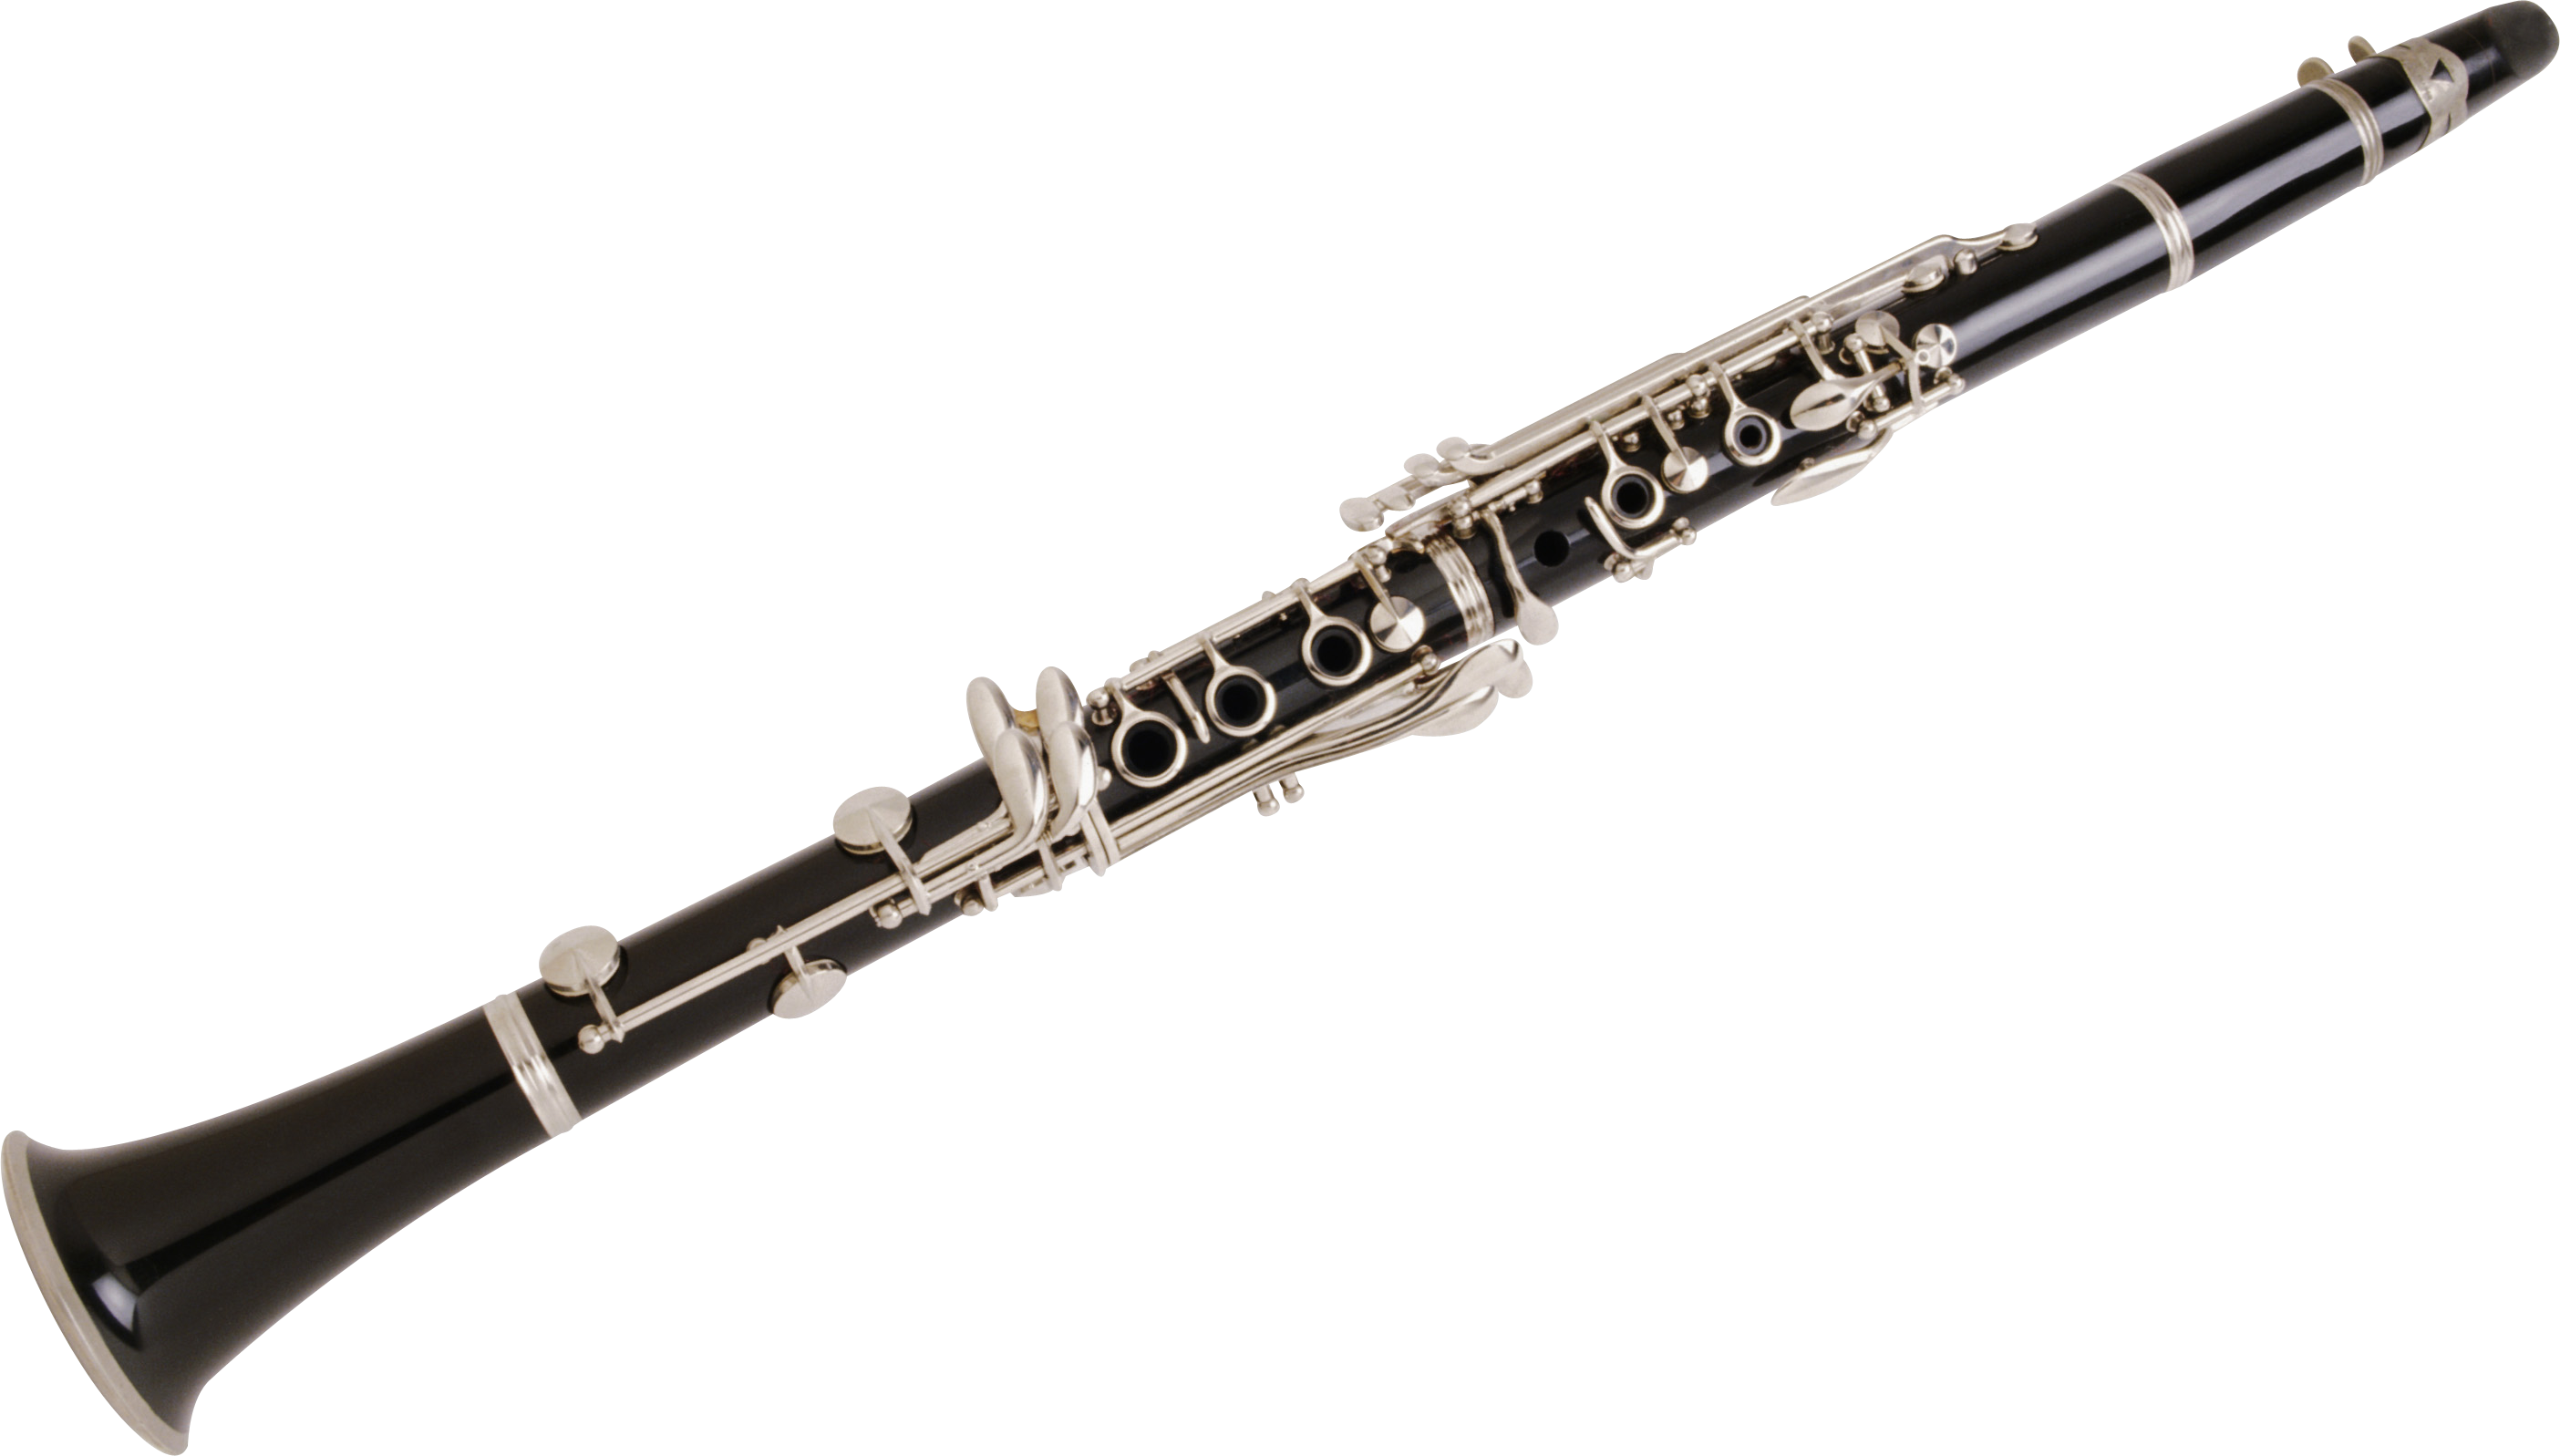 A Clarinet On A Black Background